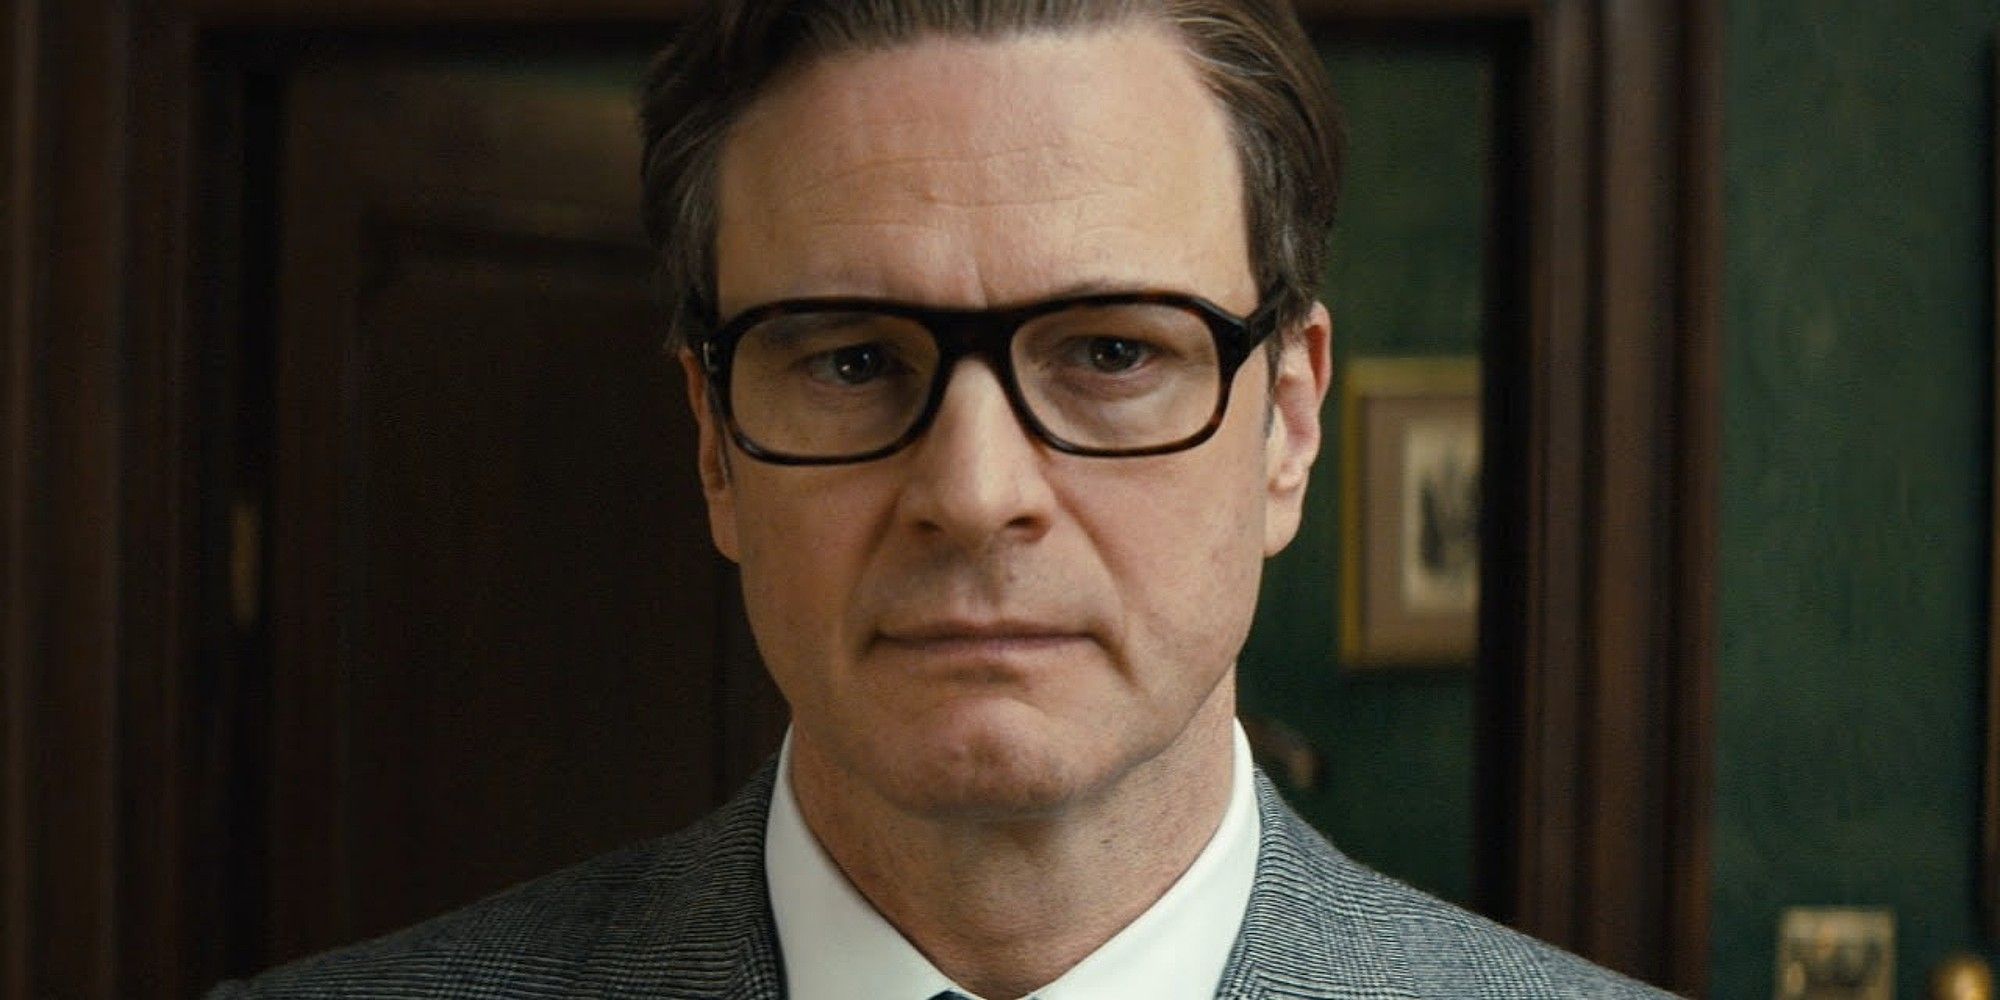 Colin Firth as Galahad in Kingsman: The Secret Service (2015)